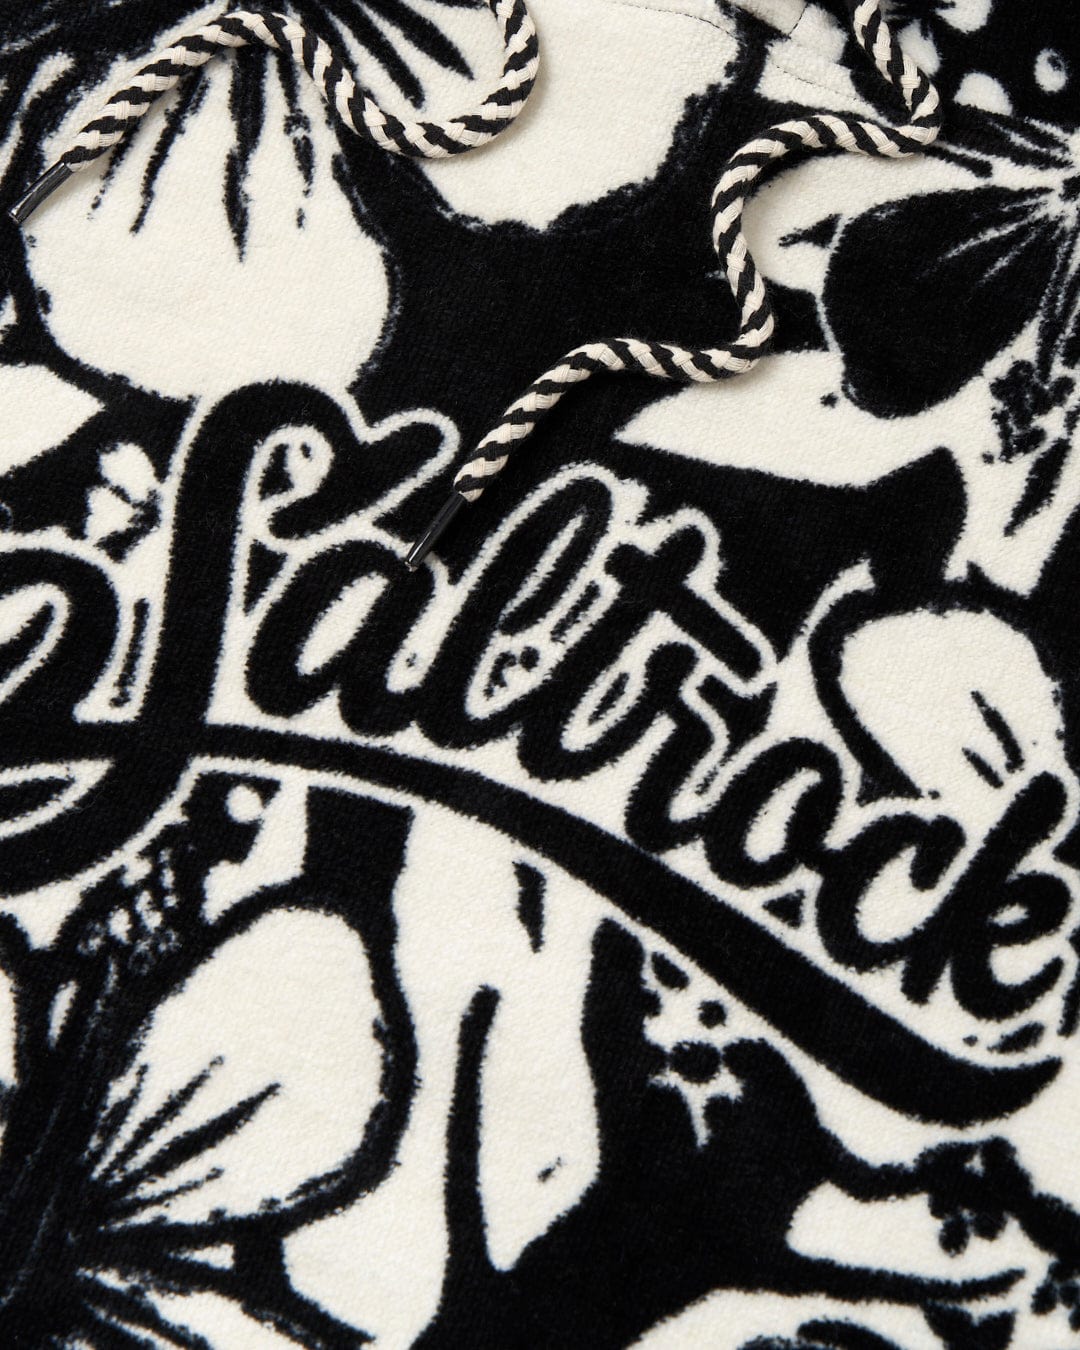 Close-up of a Saltrock Hibiscus Changing Towel in black and white fabric with a floral and text design, featuring the word "Saltrock" in cursive script.